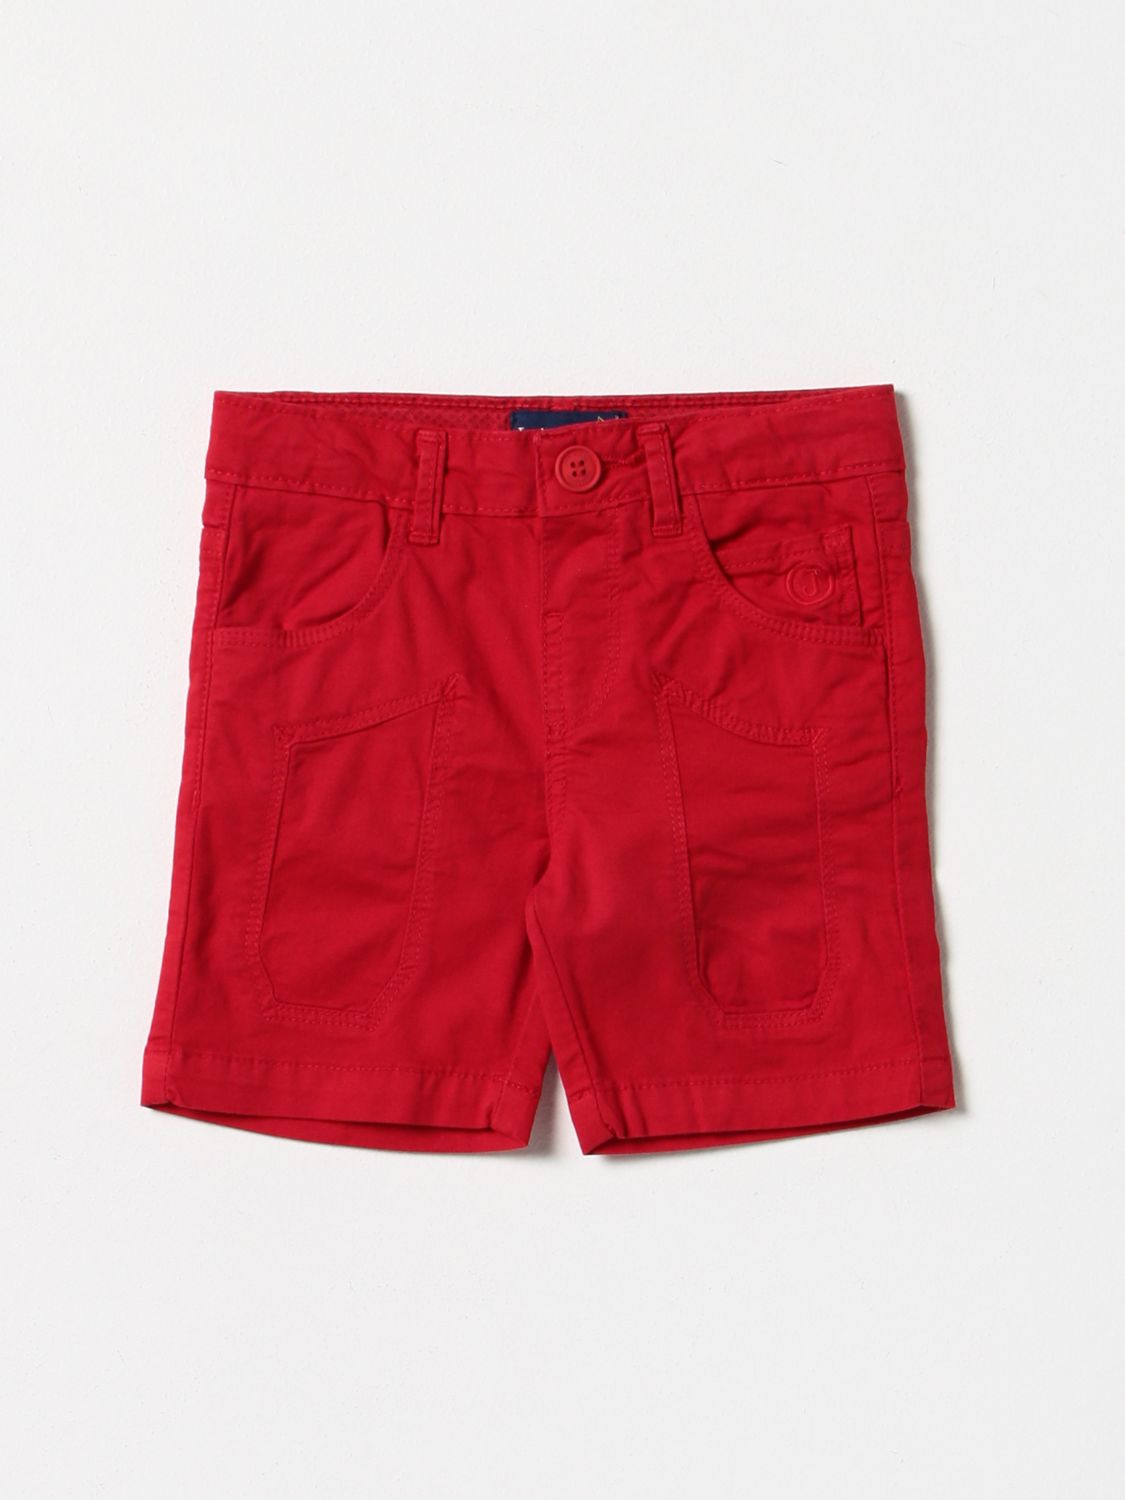 Jeckerson Babies' Shorts  Kids In Red